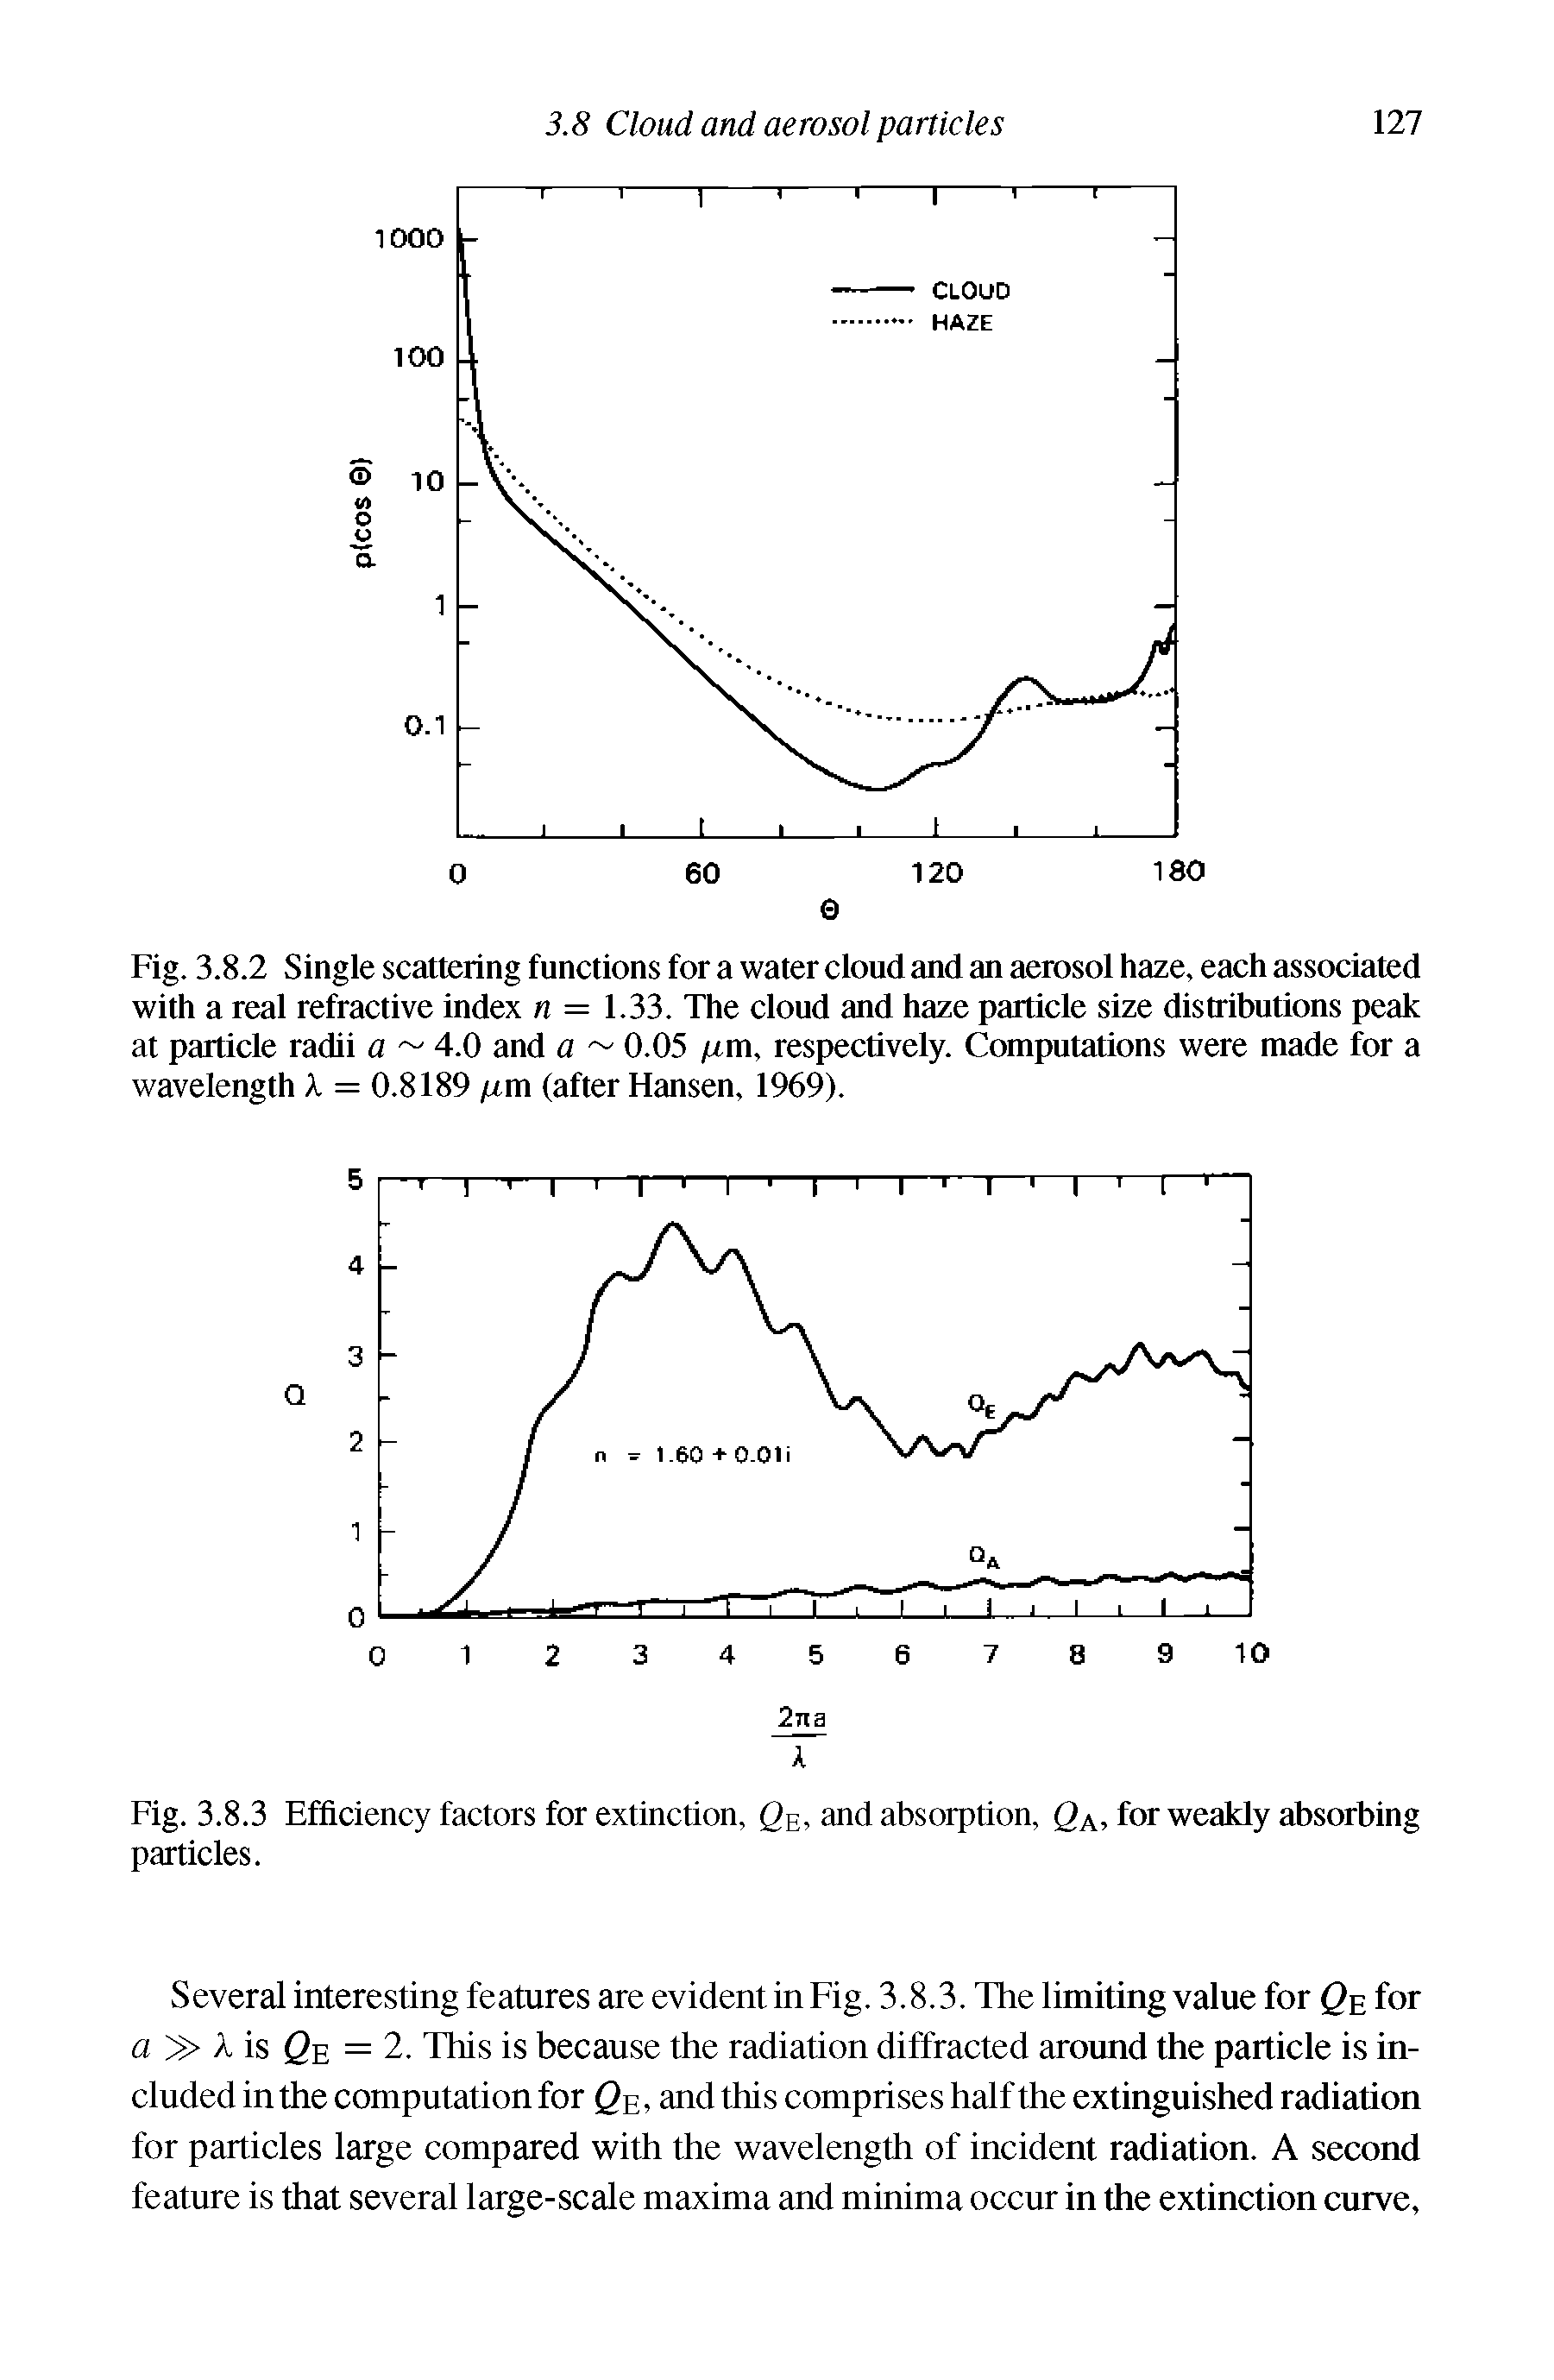 Fig. 3.8.2 Single scattering functions for a water cloud and an aerosol haze, each associated with a real refractive index n = 1.33. The cloud and haze particle size distributions peak at particle radii a 4.0 and a 0.05 pm, respectively. Computations were made for a wavelength k = 0.8189 pm (after Hansen, 1969).